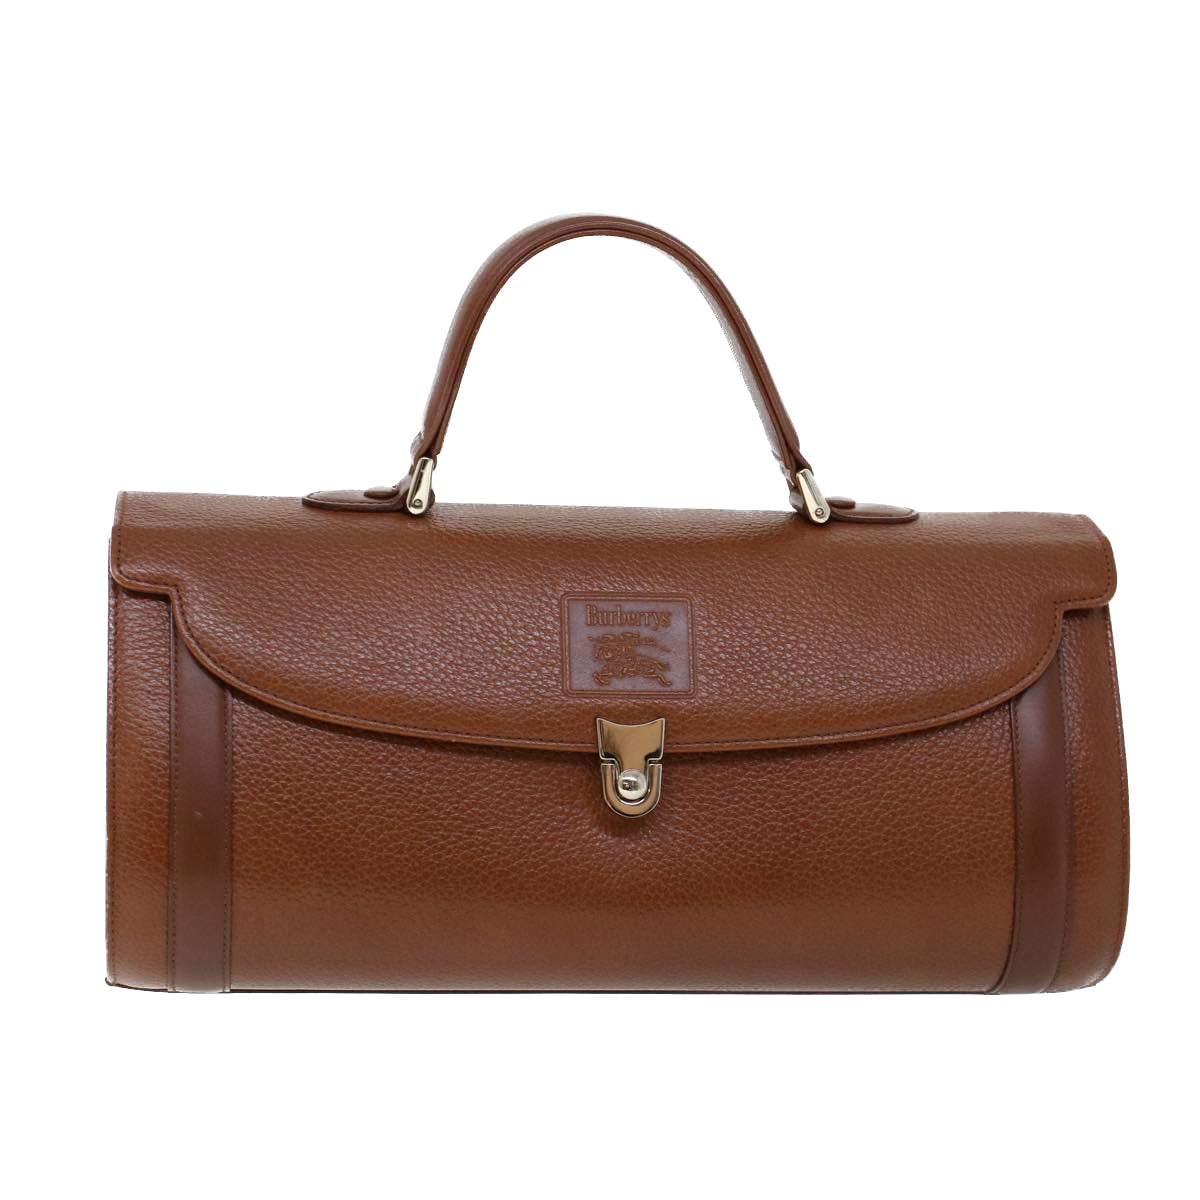 Burberrys Hand Bag Leather Brown Auth 53731